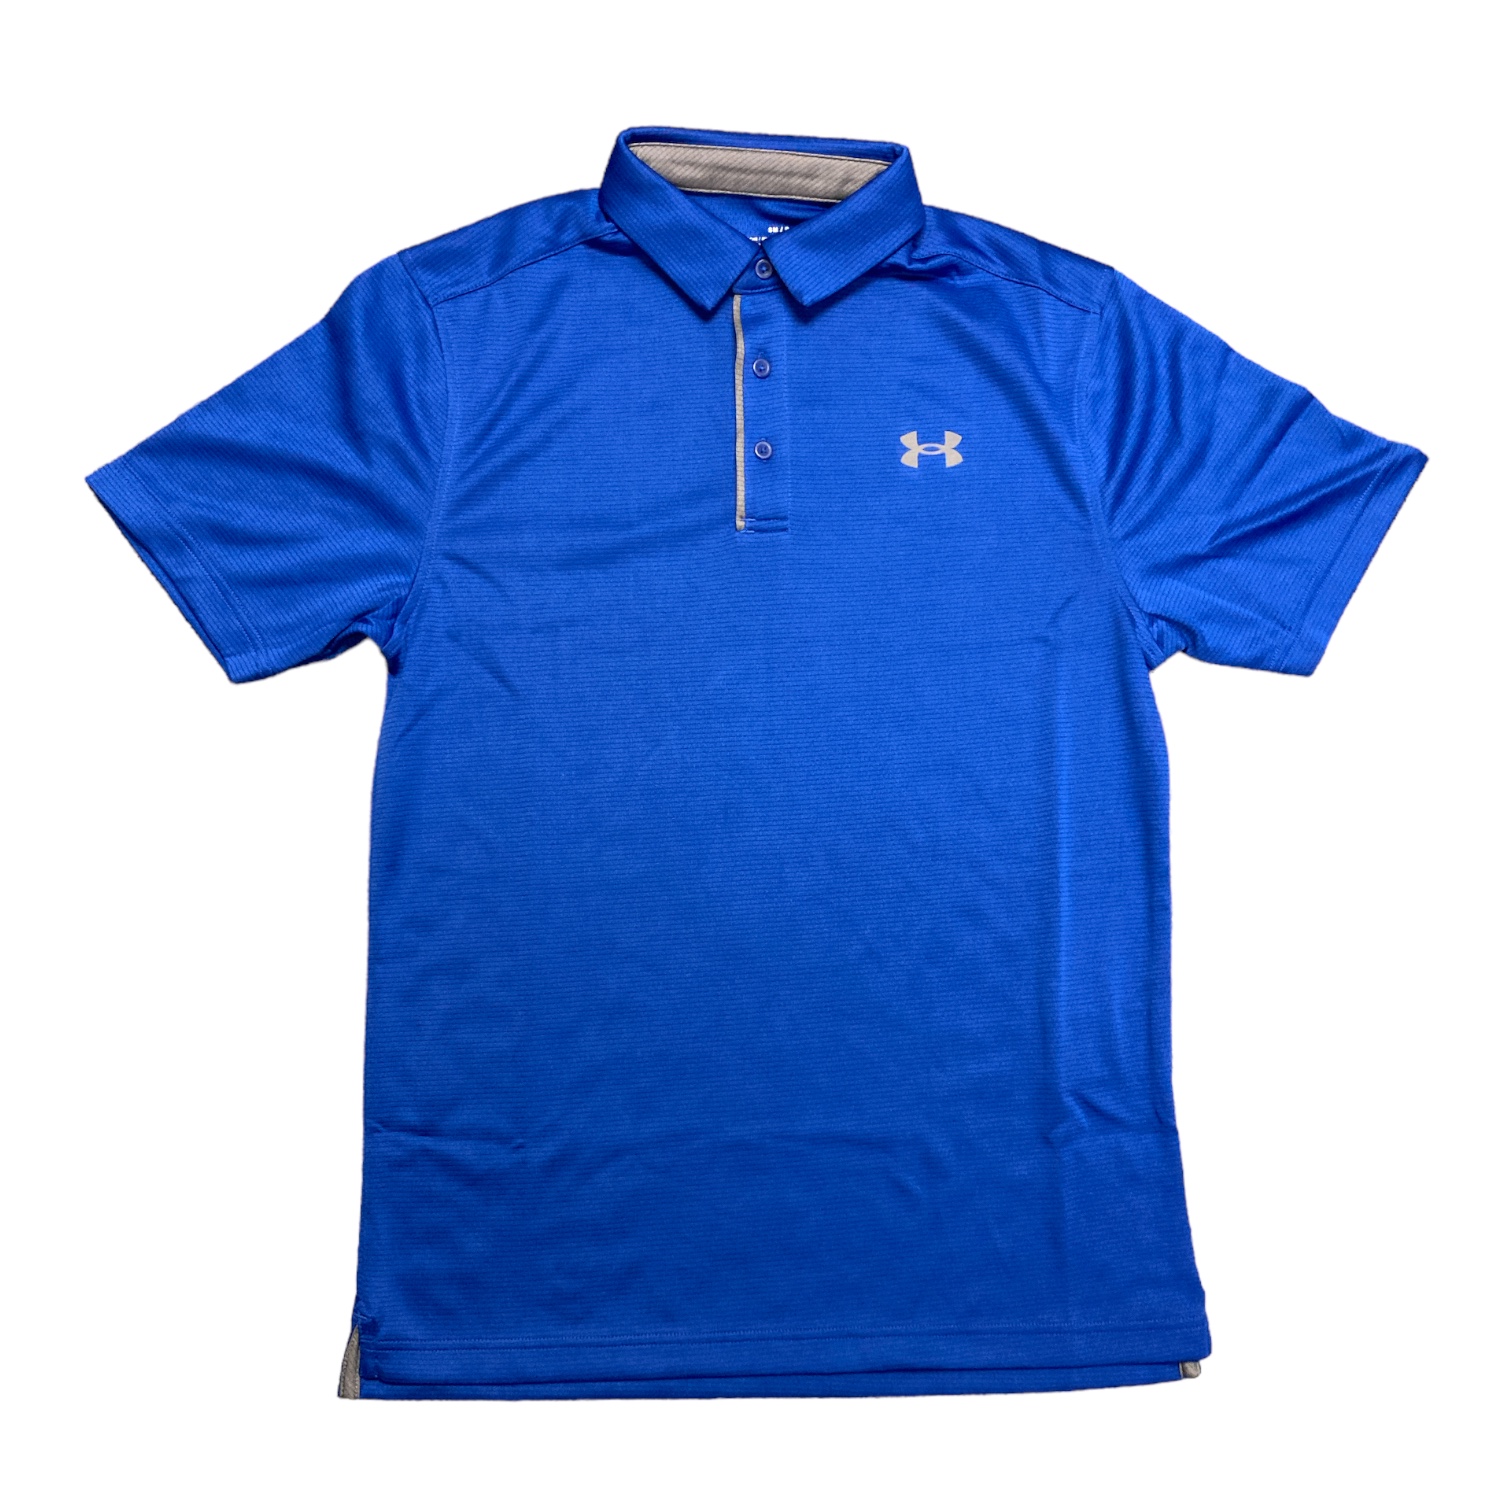 Under Armour Men's and Big Men's UA Tech Polo Shirt, Sizes up to 2XL - image 1 of 2